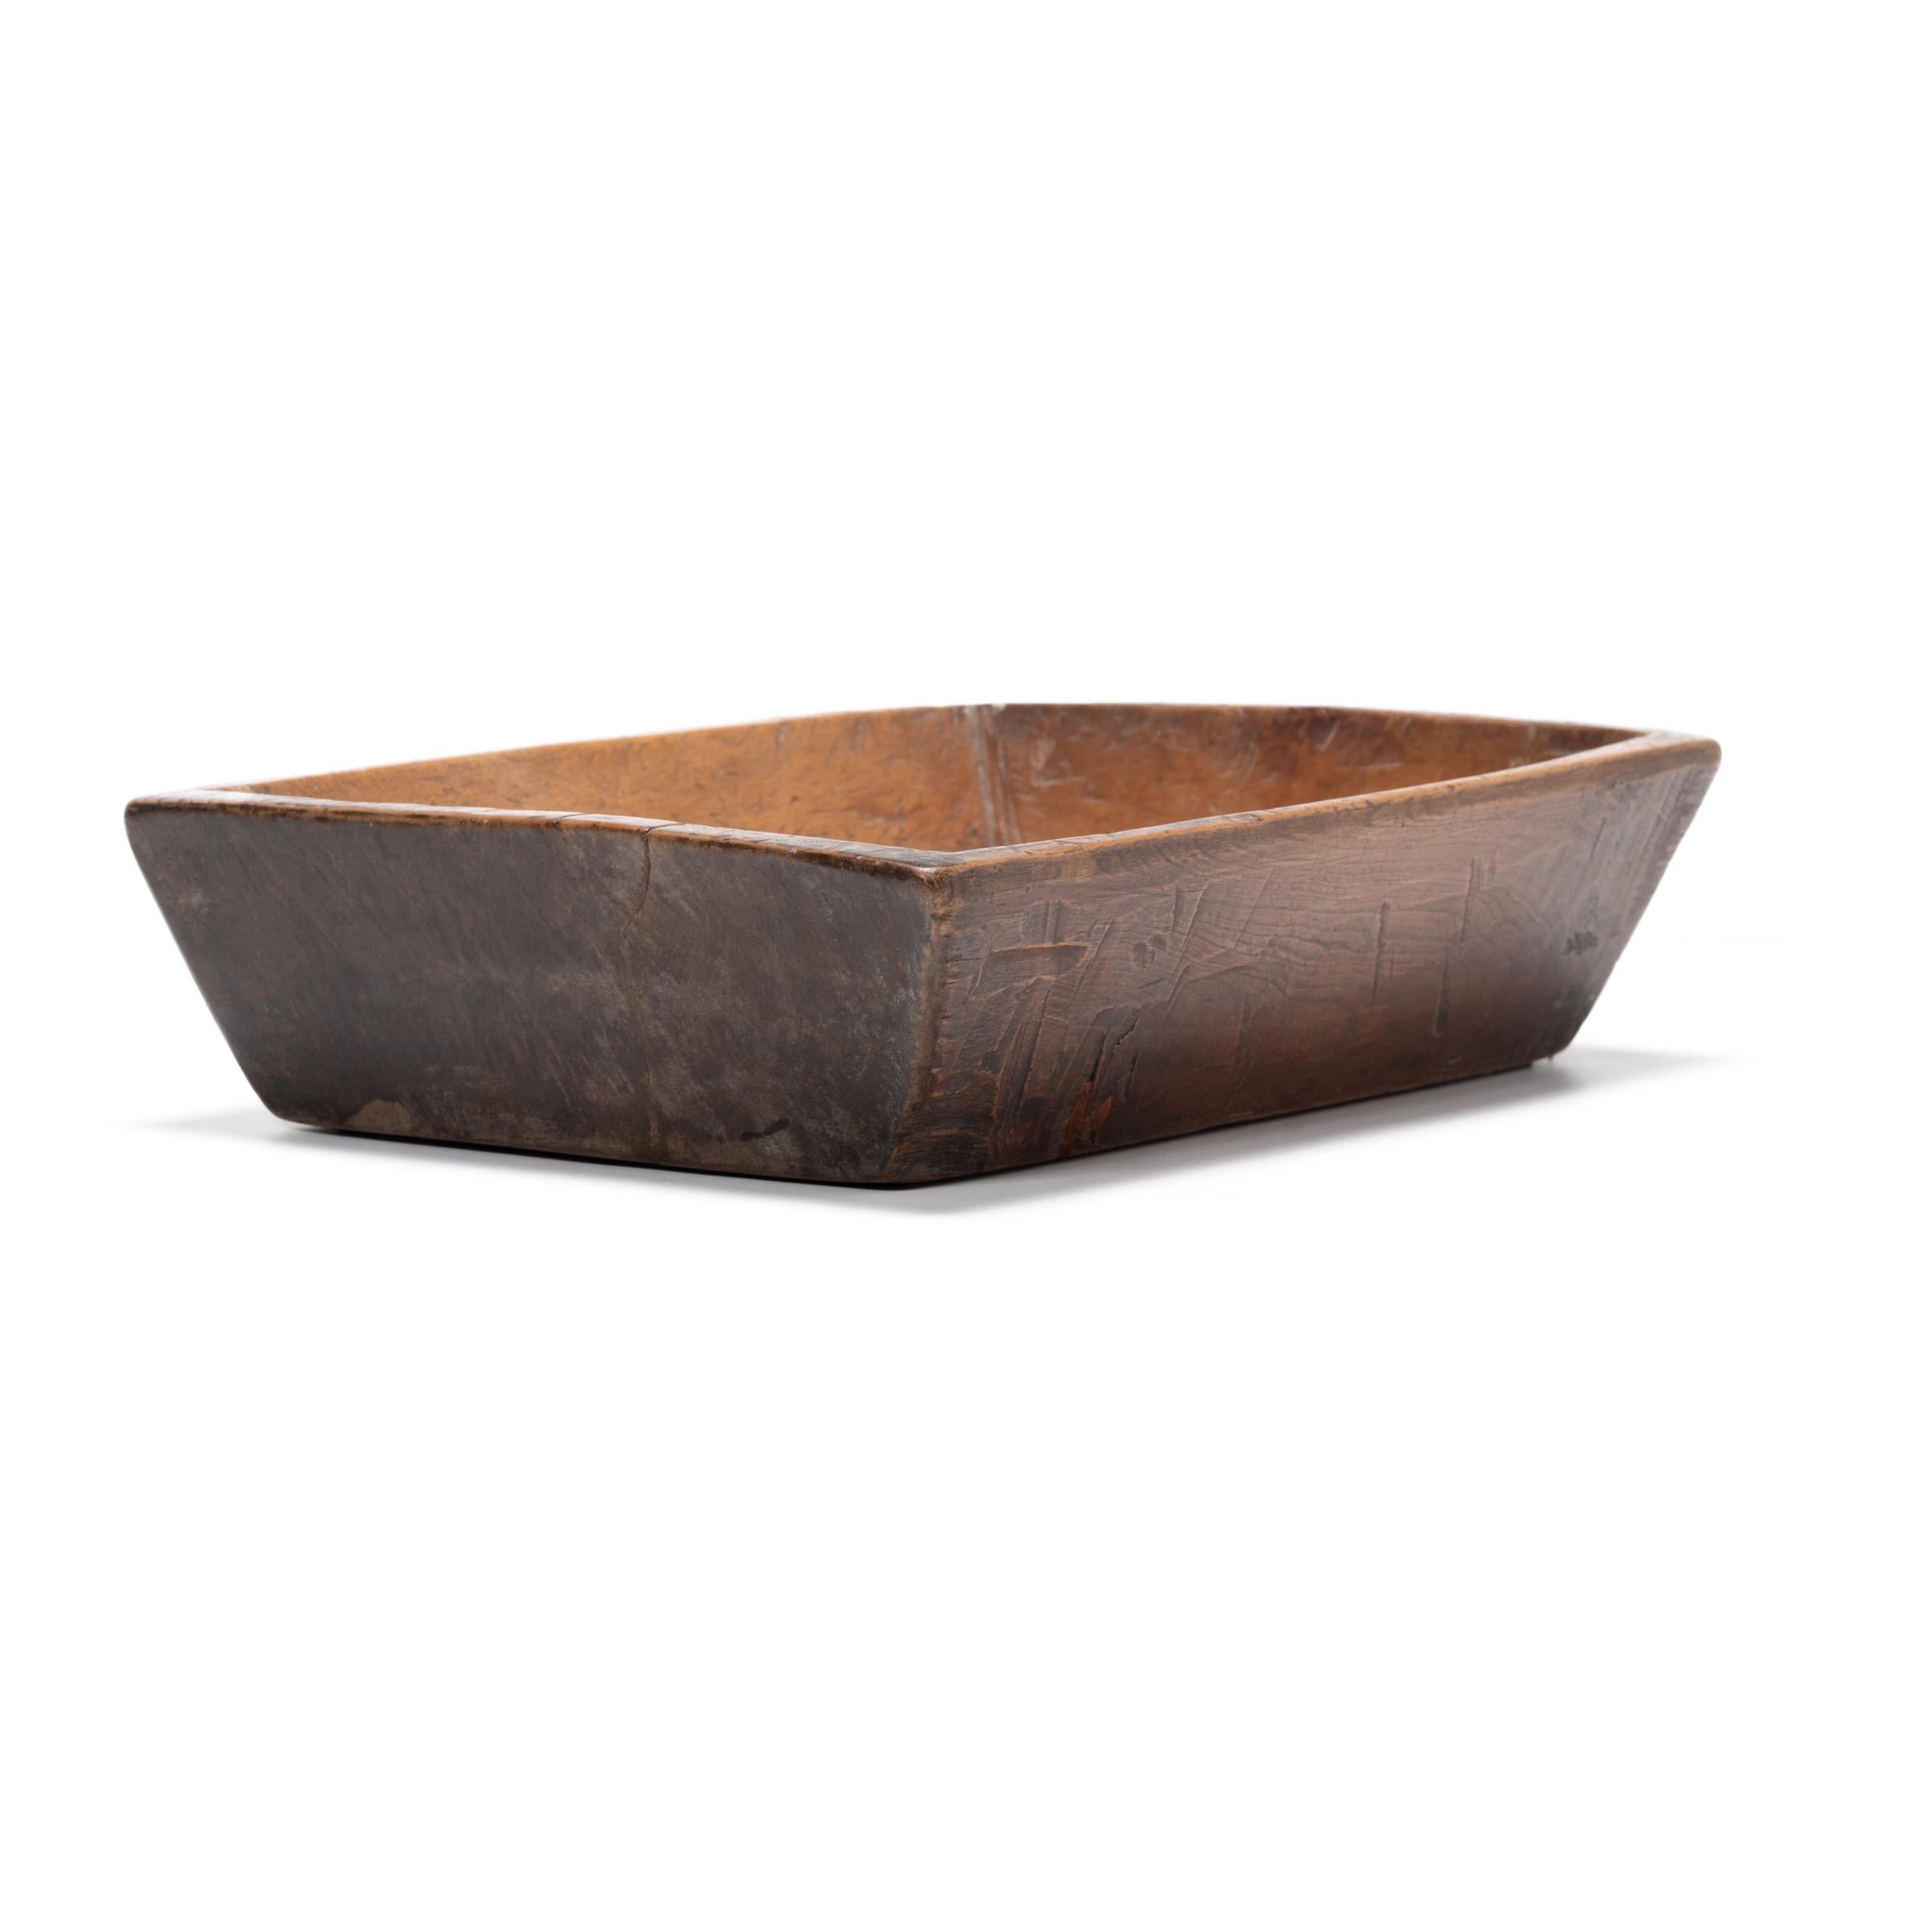 Primitive Large Rustic Chinese Tray, c. 1900 For Sale